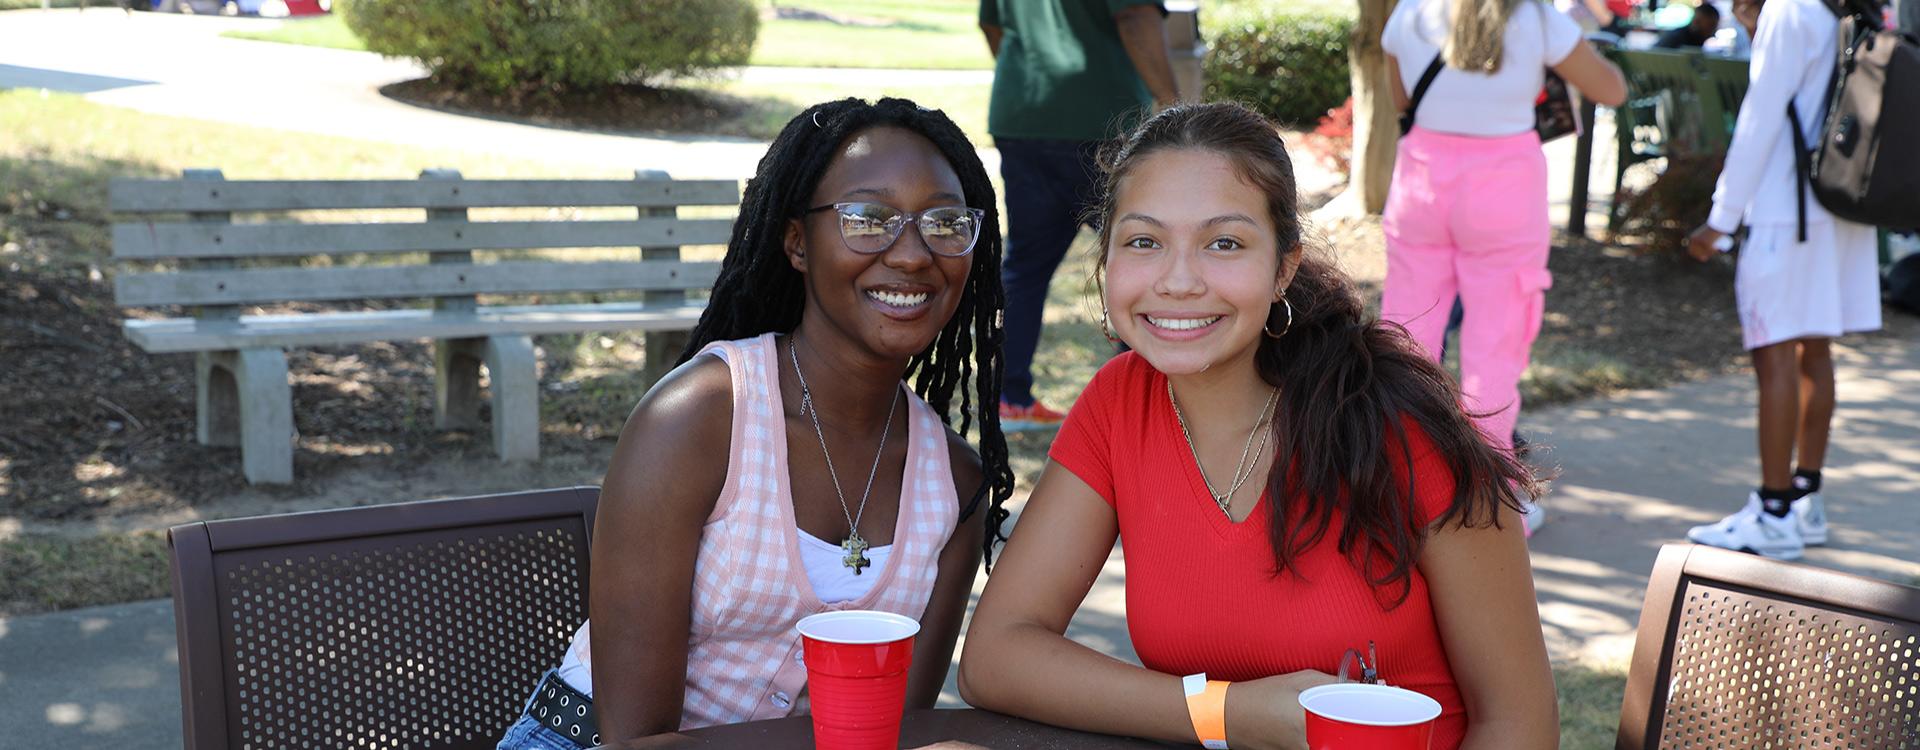 two students sitting at a table posing for the camera with students in the background